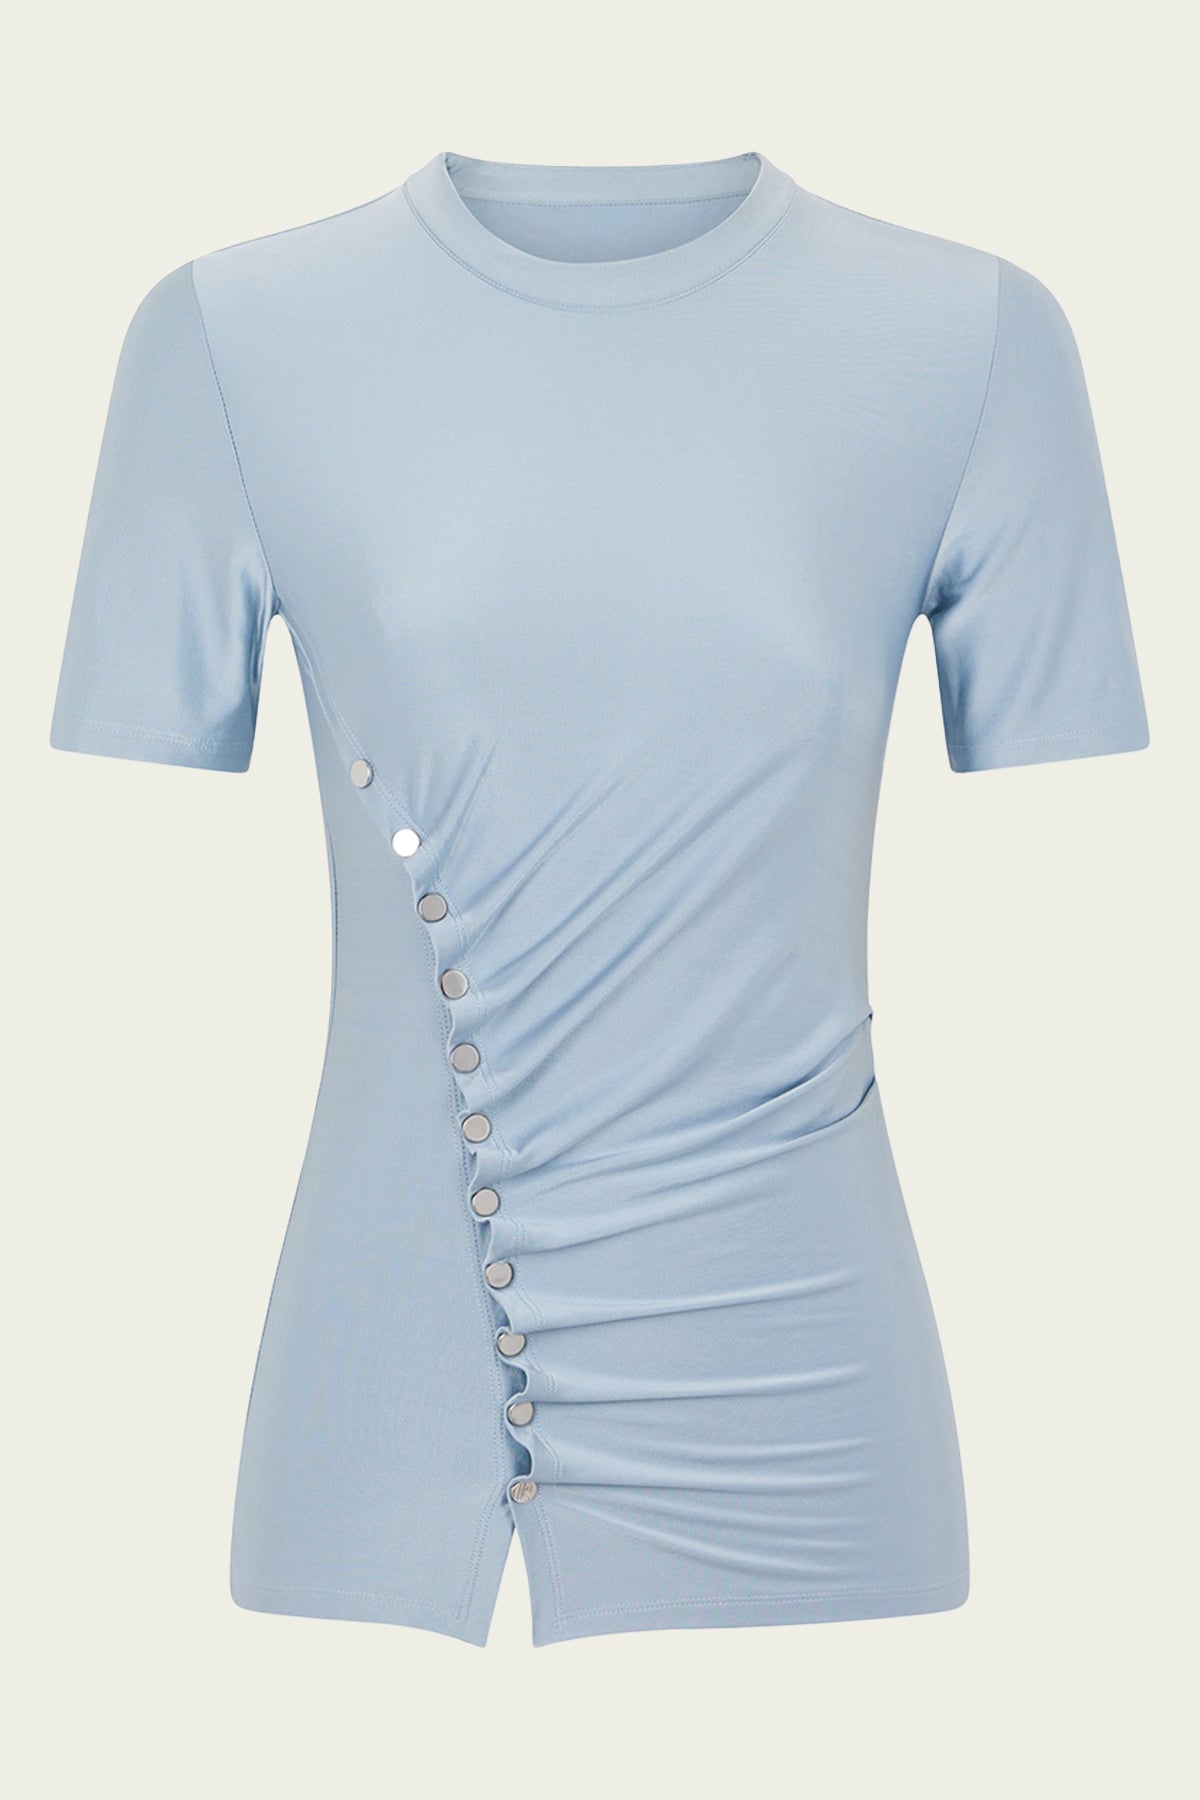 Draped Short-Sleeve Button Top in Faded Blue - shop-olivia.com